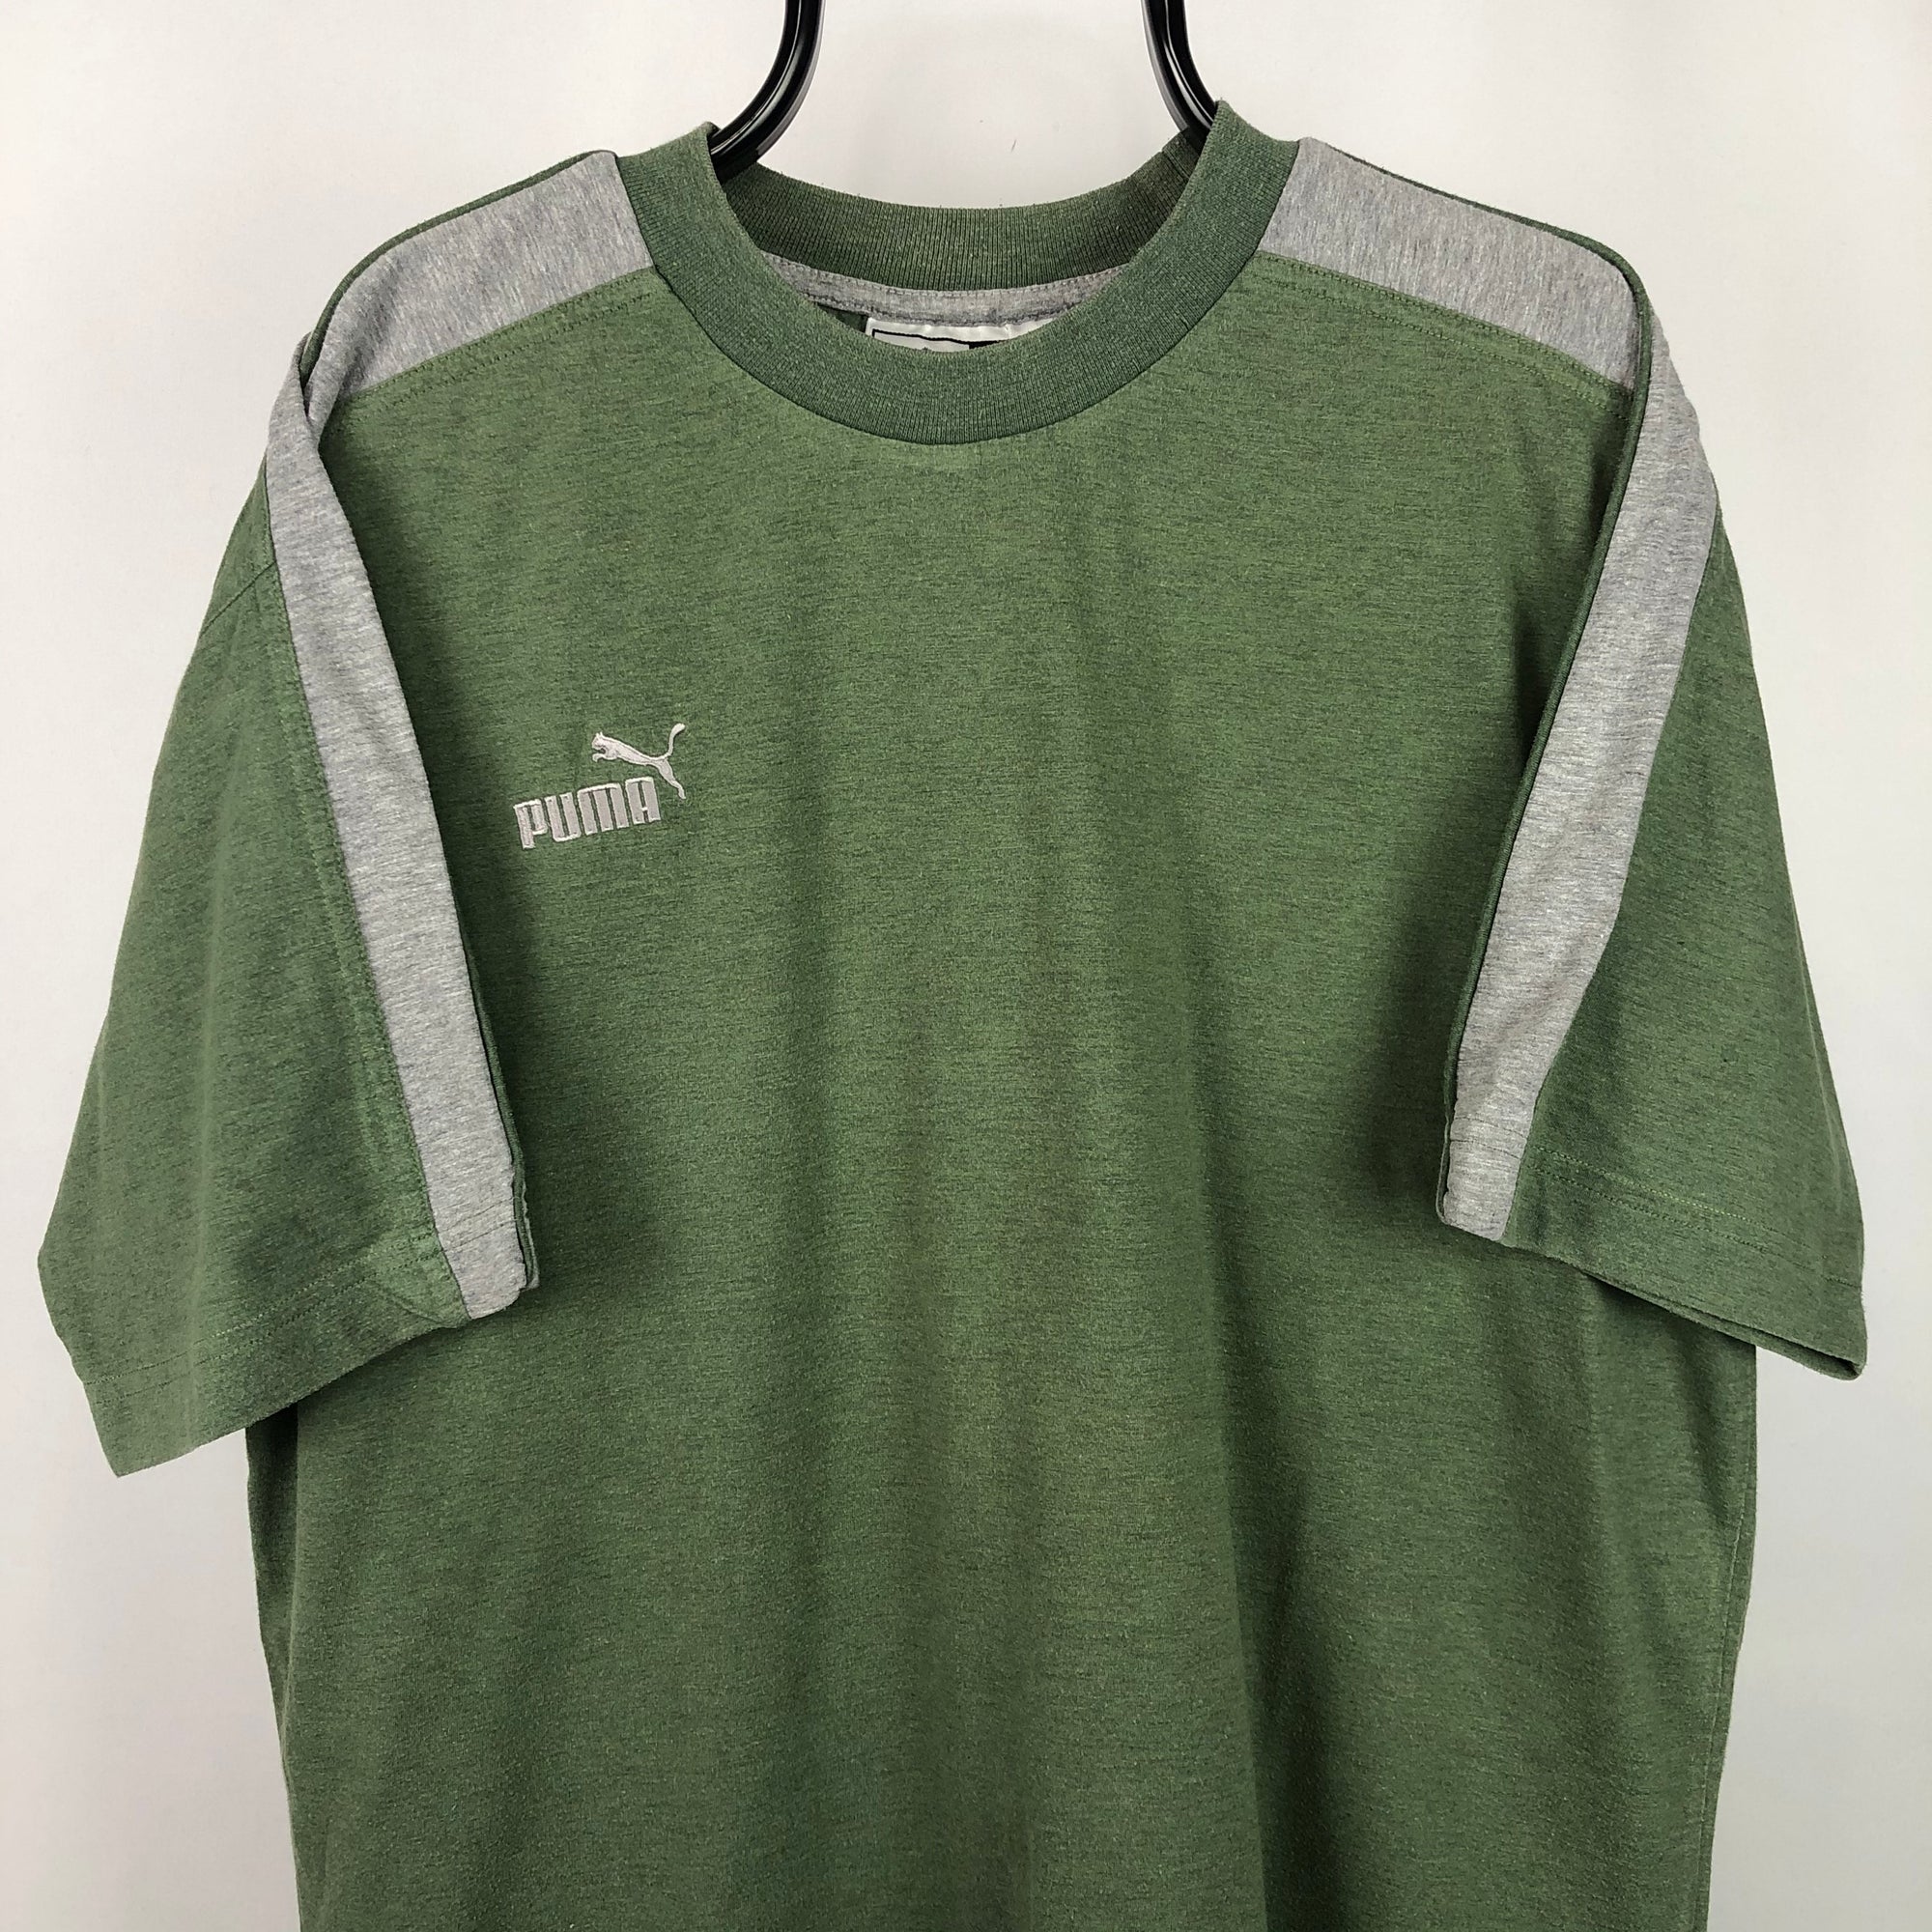 Vintage Puma Tee in Forest Green/Grey - Men's Large/Women's XL